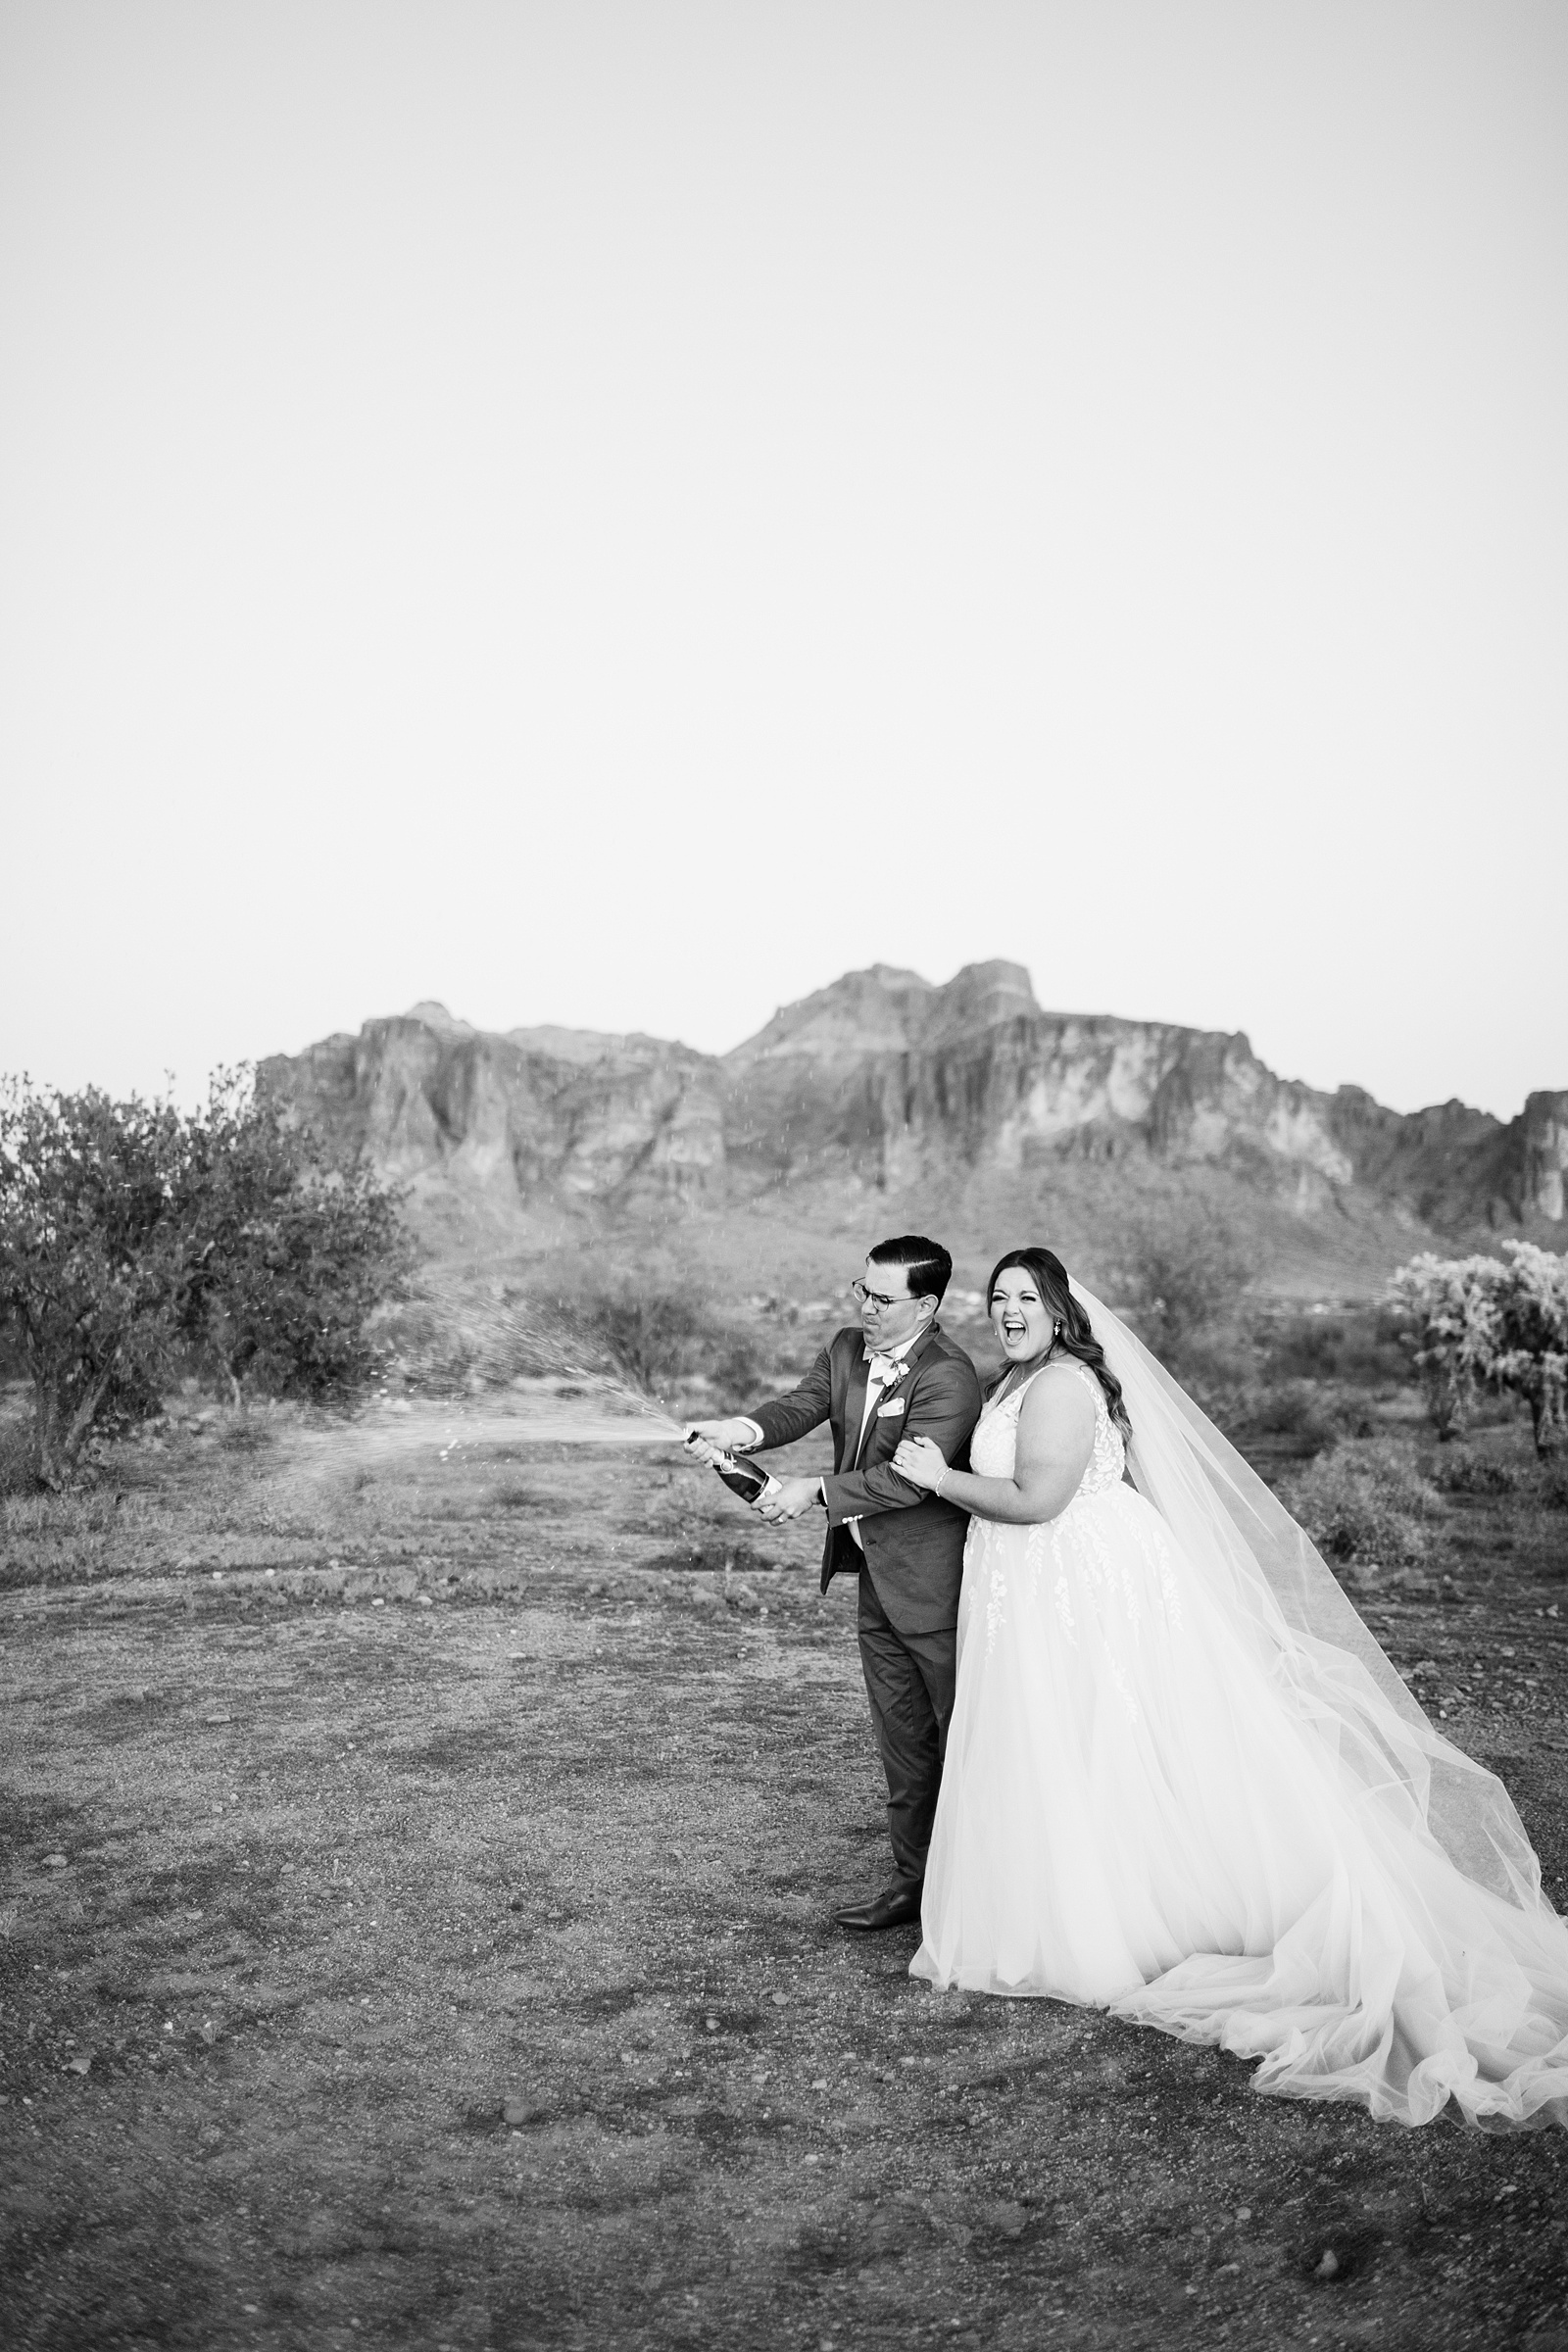 Bride & Groom popping champagne together during their a Phoenix desert intimate wedding by Arizona wedding photographer Juniper and Co Photography.